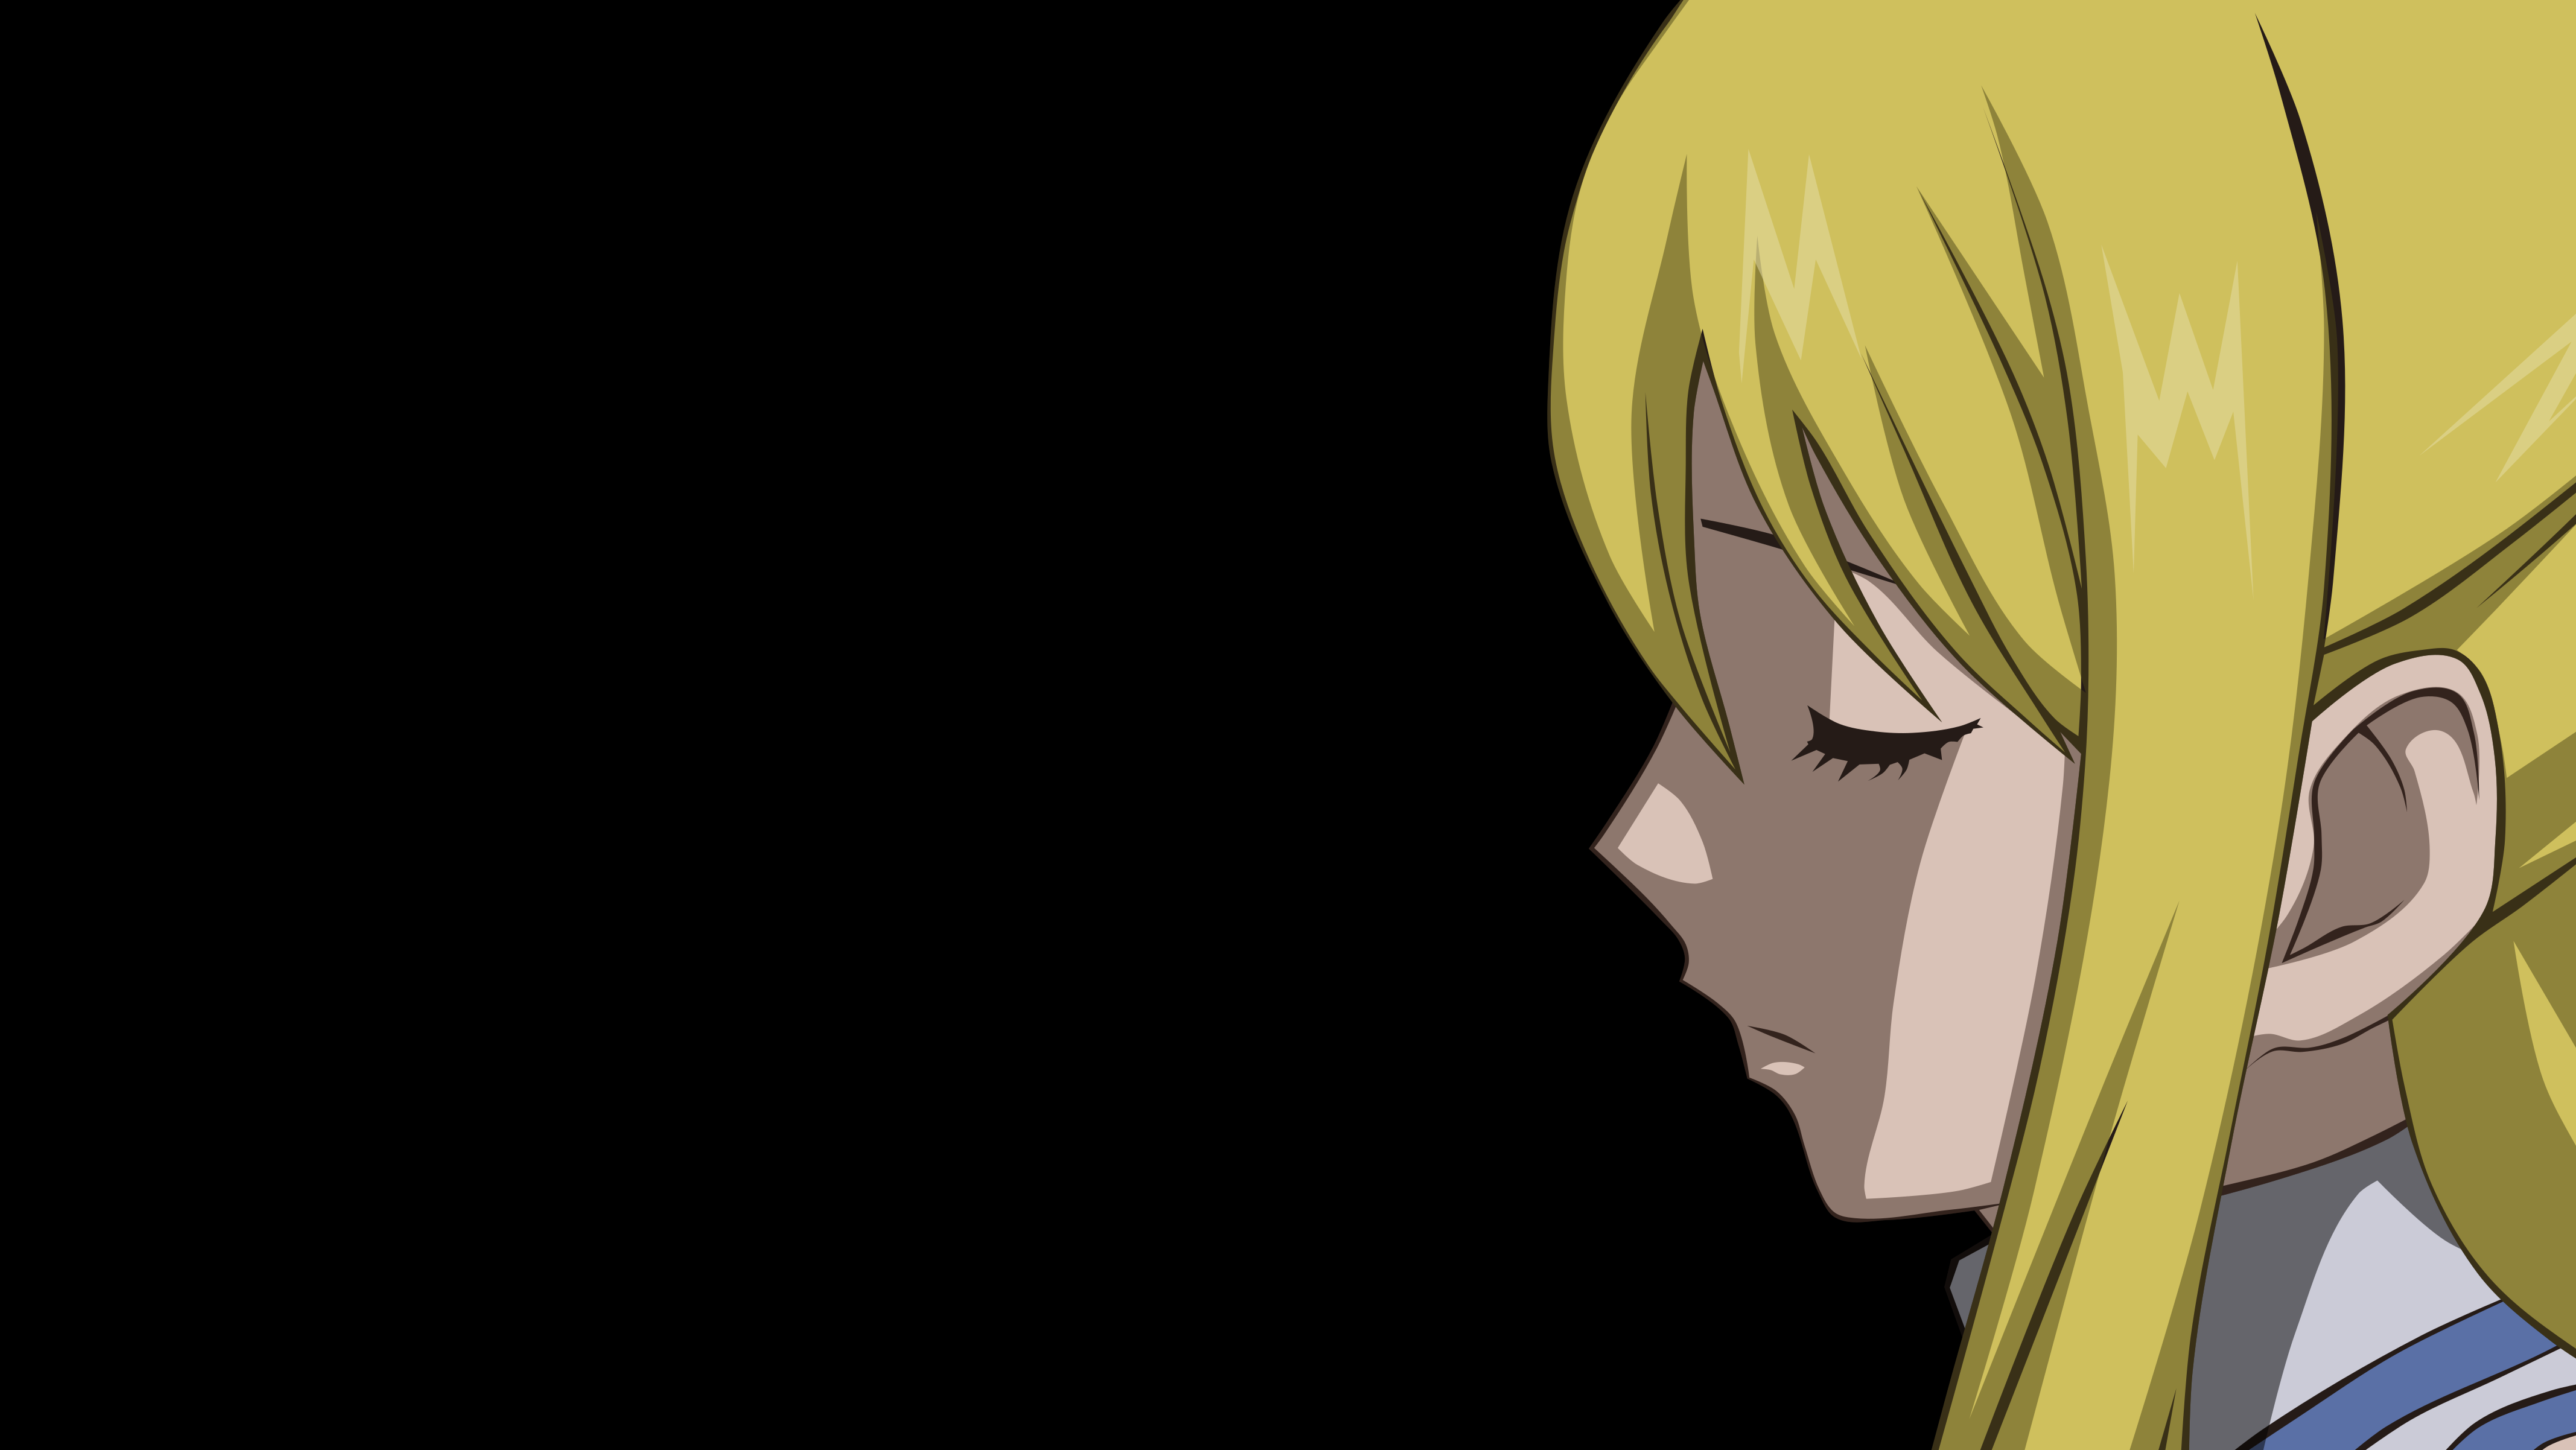 Anime 4269x2403 Heartfilia Lucy  Fairy Tail anime girls closed eyes face profile blonde black background